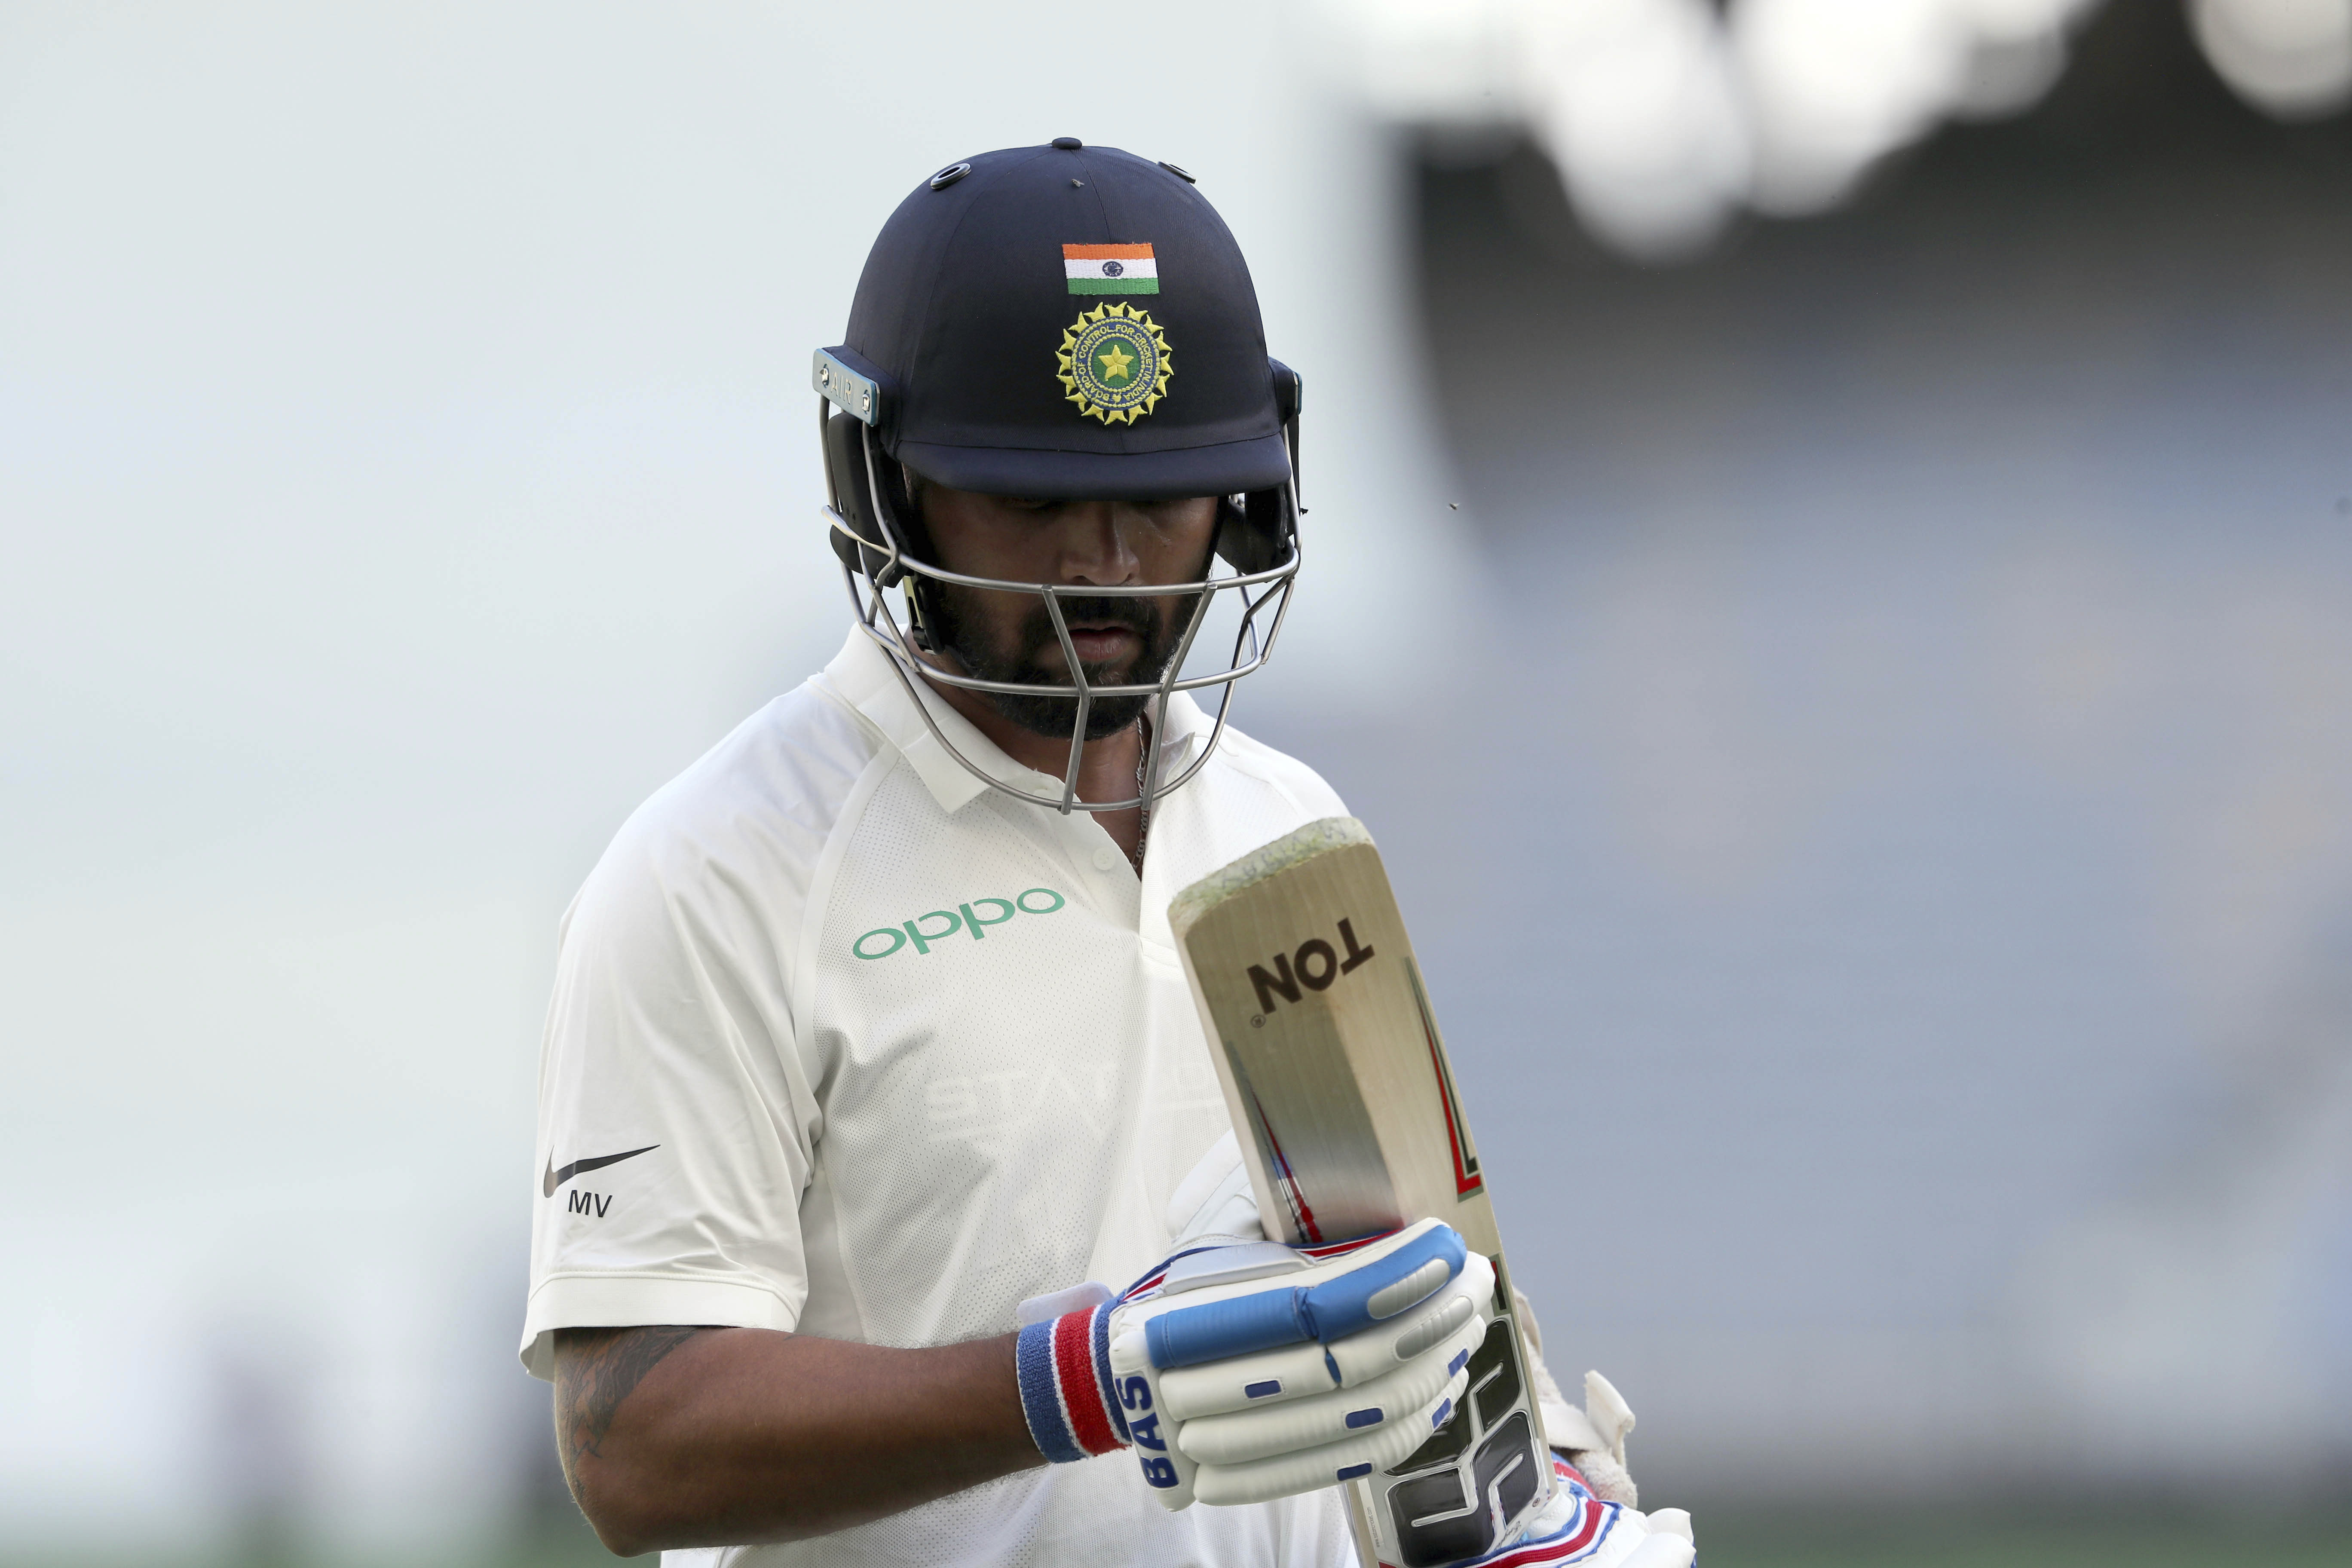 India's Murali Vijay walks off after being dismissed during play in the second cricket test between Australia and India in Perth - AP